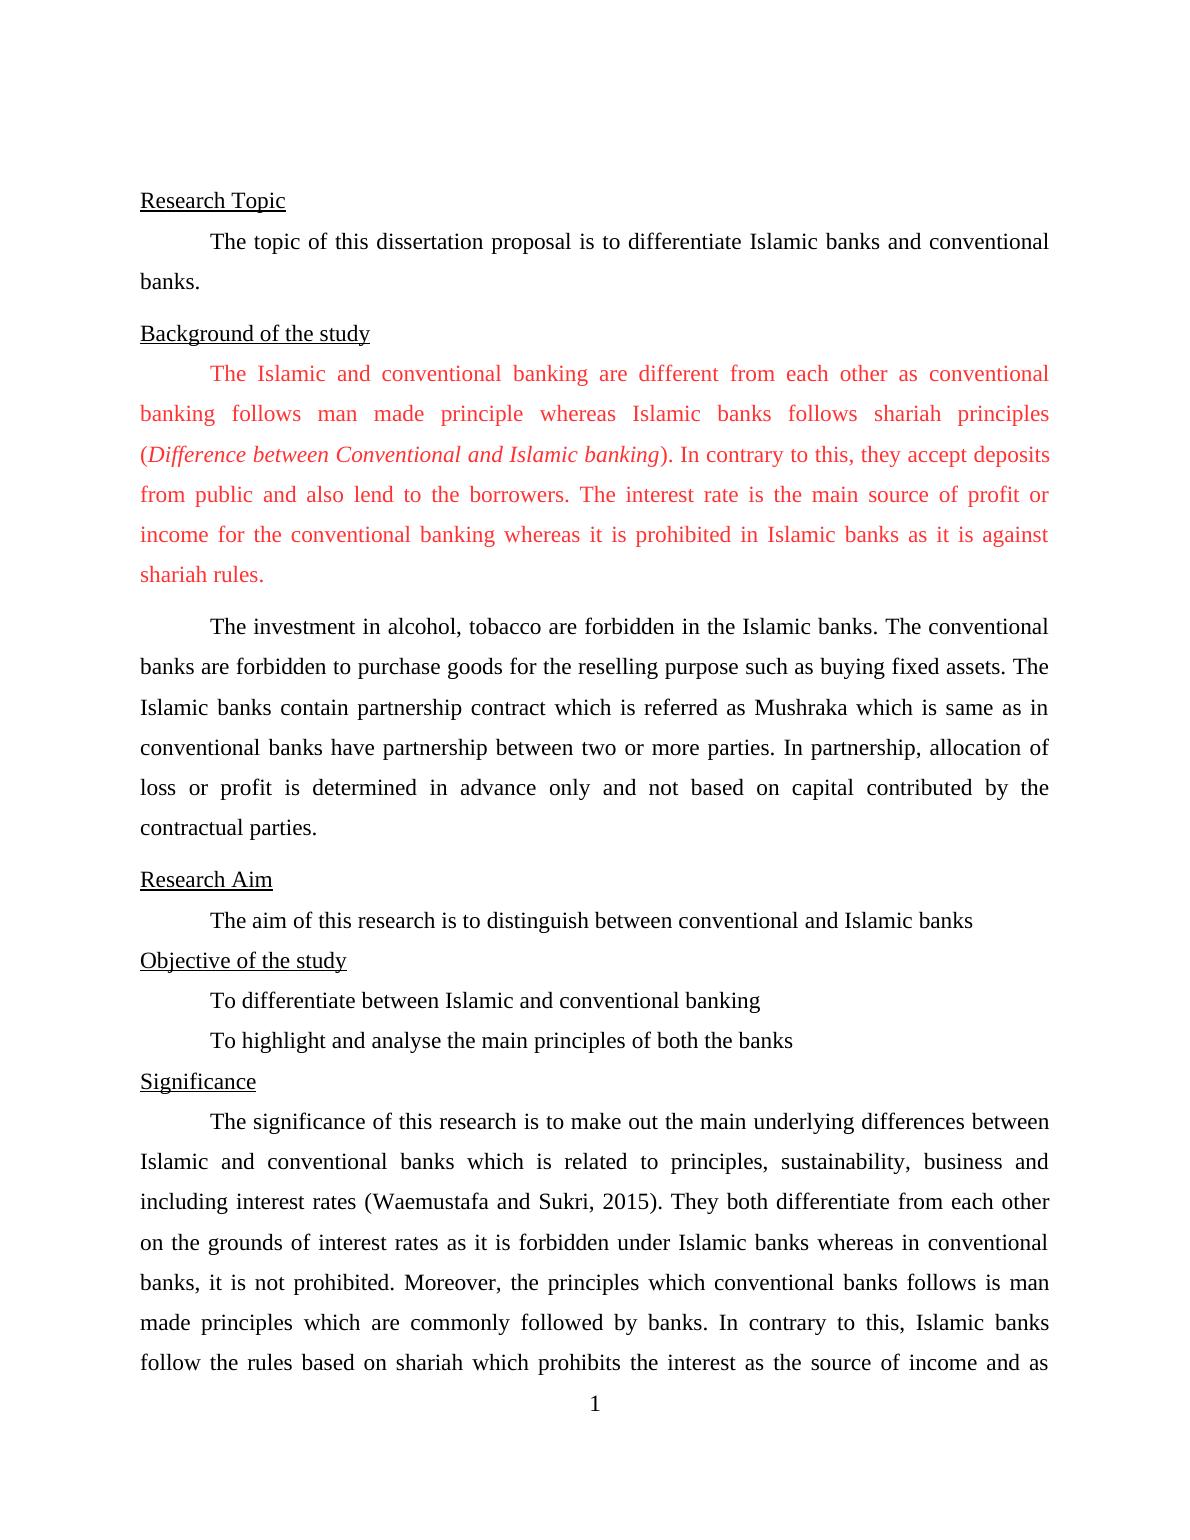 Assignment on Islamic Banks and Conventional Banks Differentiate_3